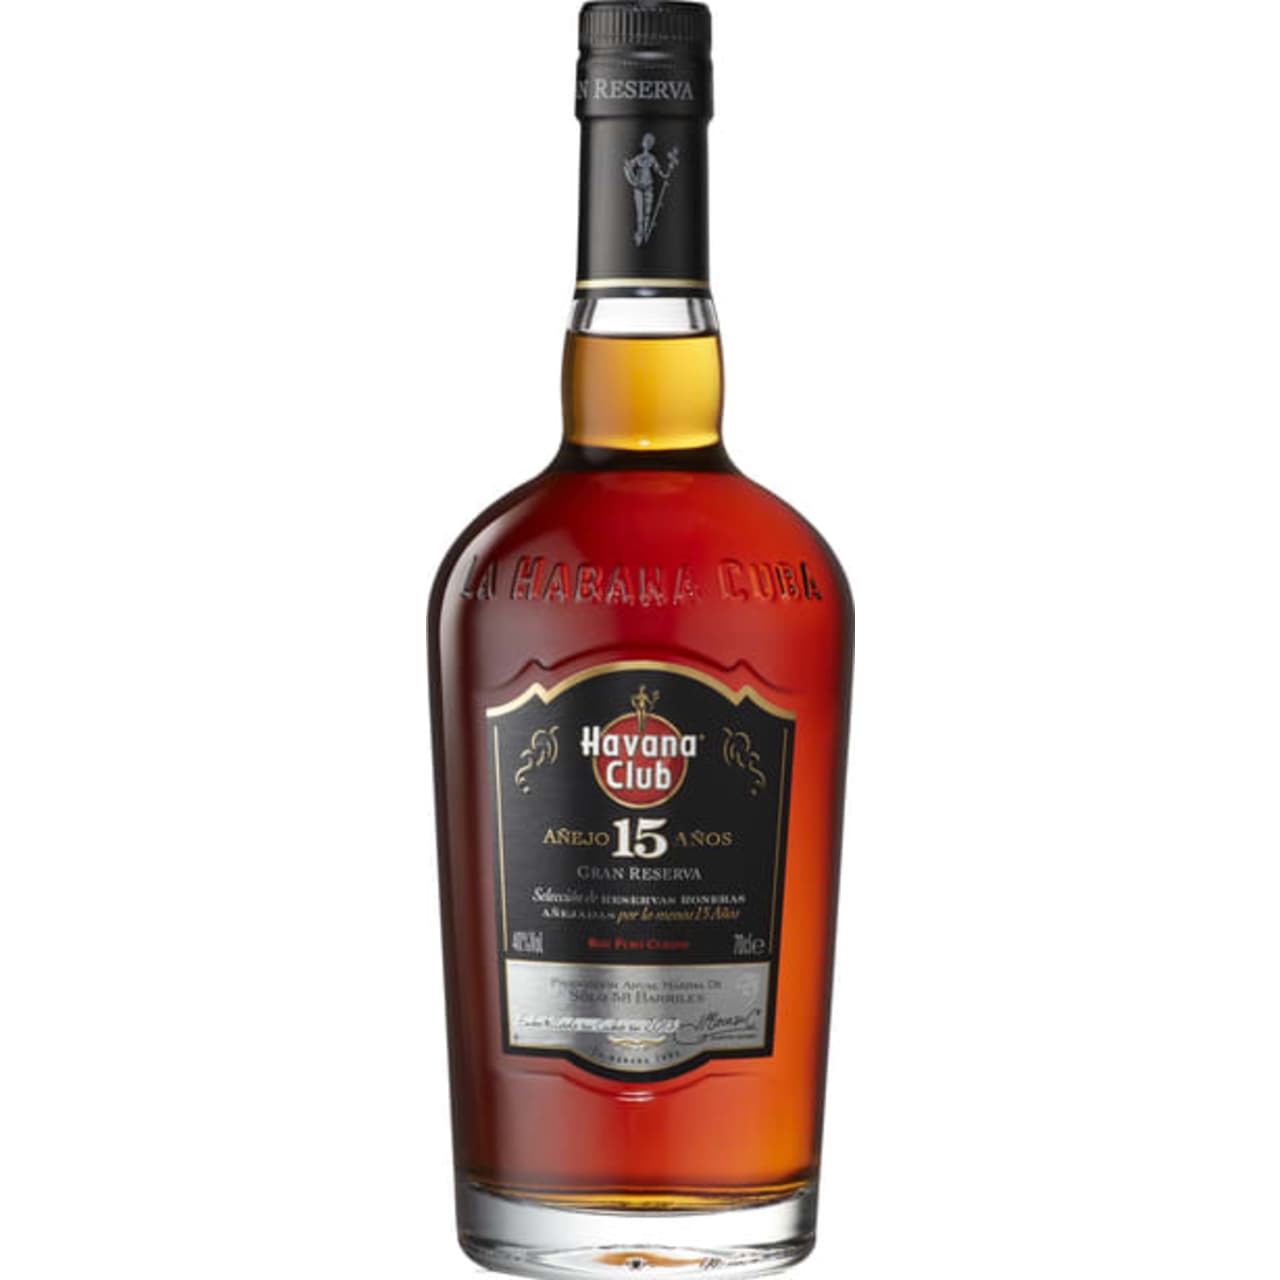 Havana Club 15 años is a cascade of flavours. An exceptionally long and quality ageing process that results in a luxurious, smooth mouthfeel, with incomparable softness of tannins and a very fruity aroma. This rum is a bright and full-bodied liquid, with a rich, mahogany colour.